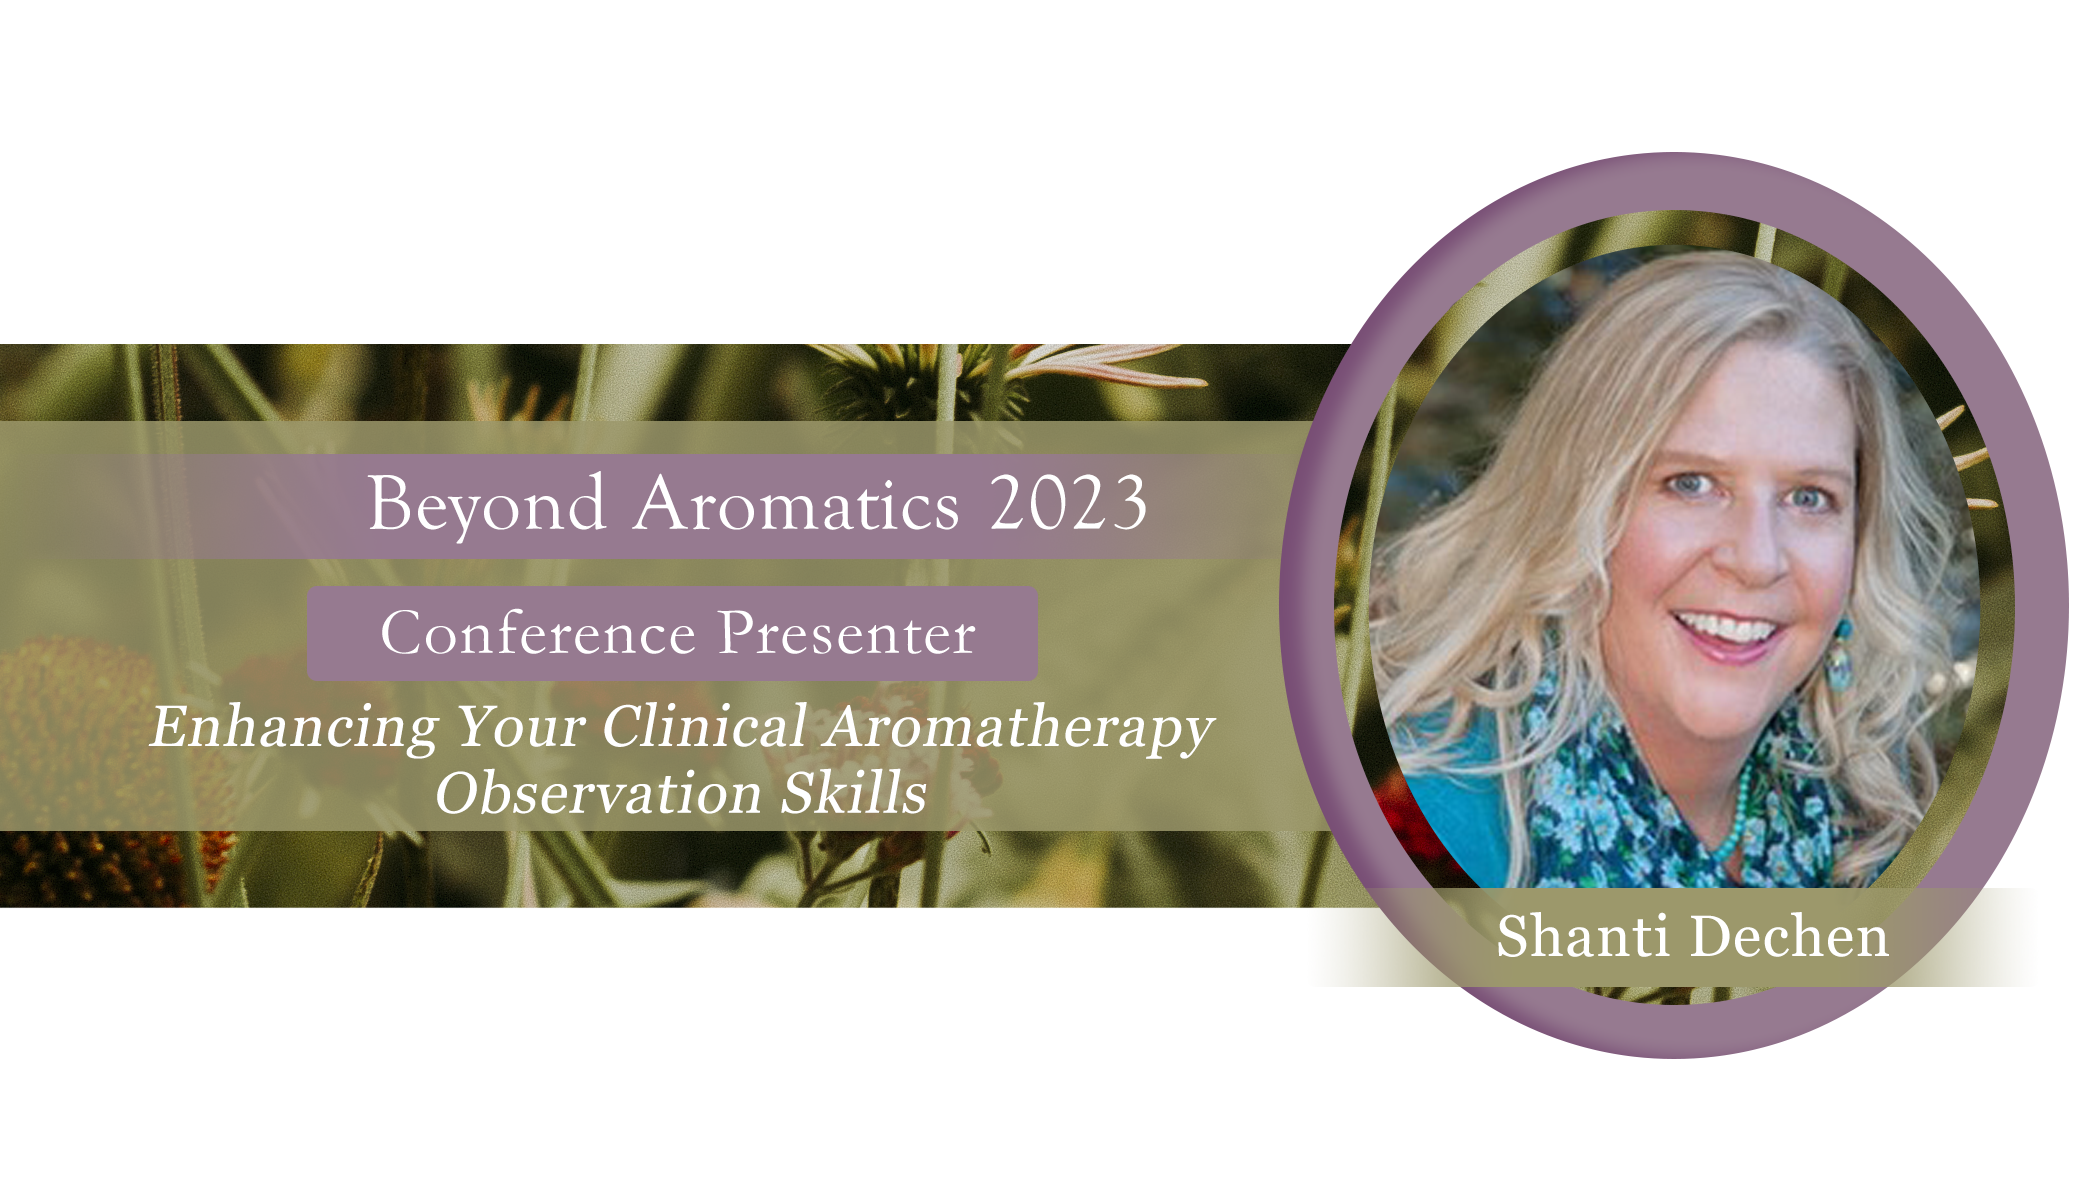 Enhancing Your Clinical Aromatherapy Observation Skills